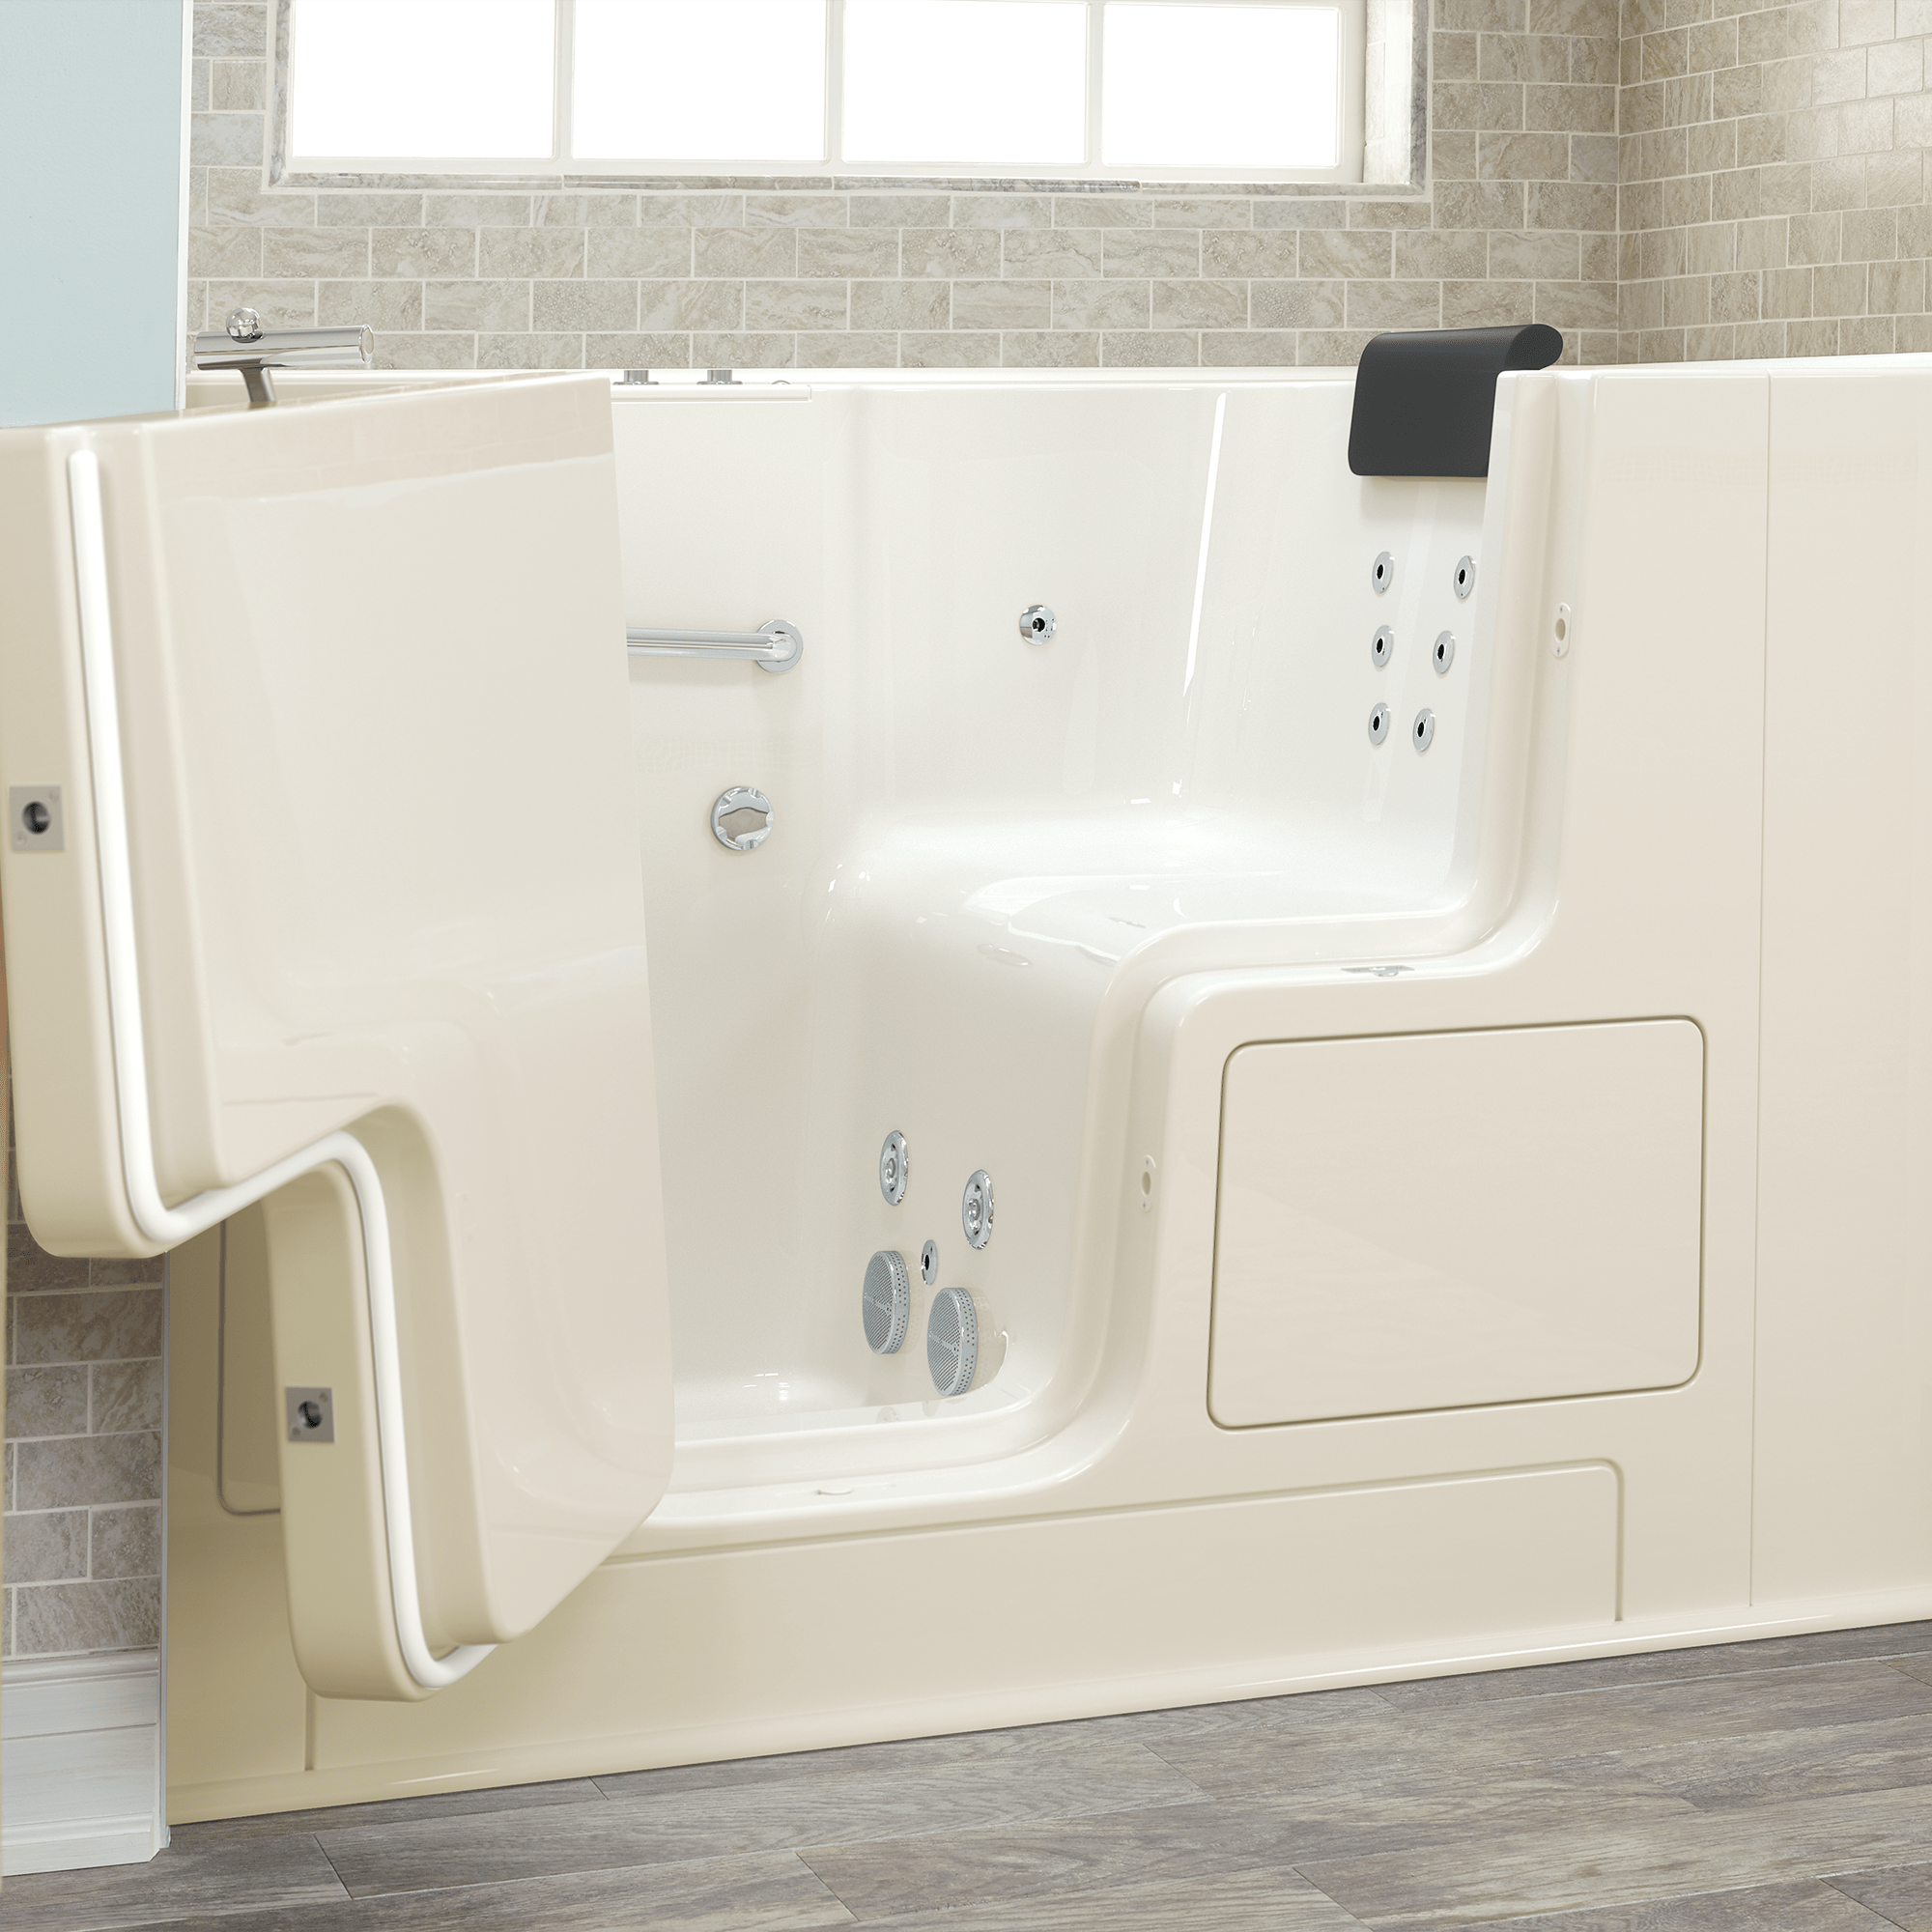 Gelcoat Premium Series 32 x 52 -Inch Walk-in Tub With Whirlpool System - Left-Hand Drain